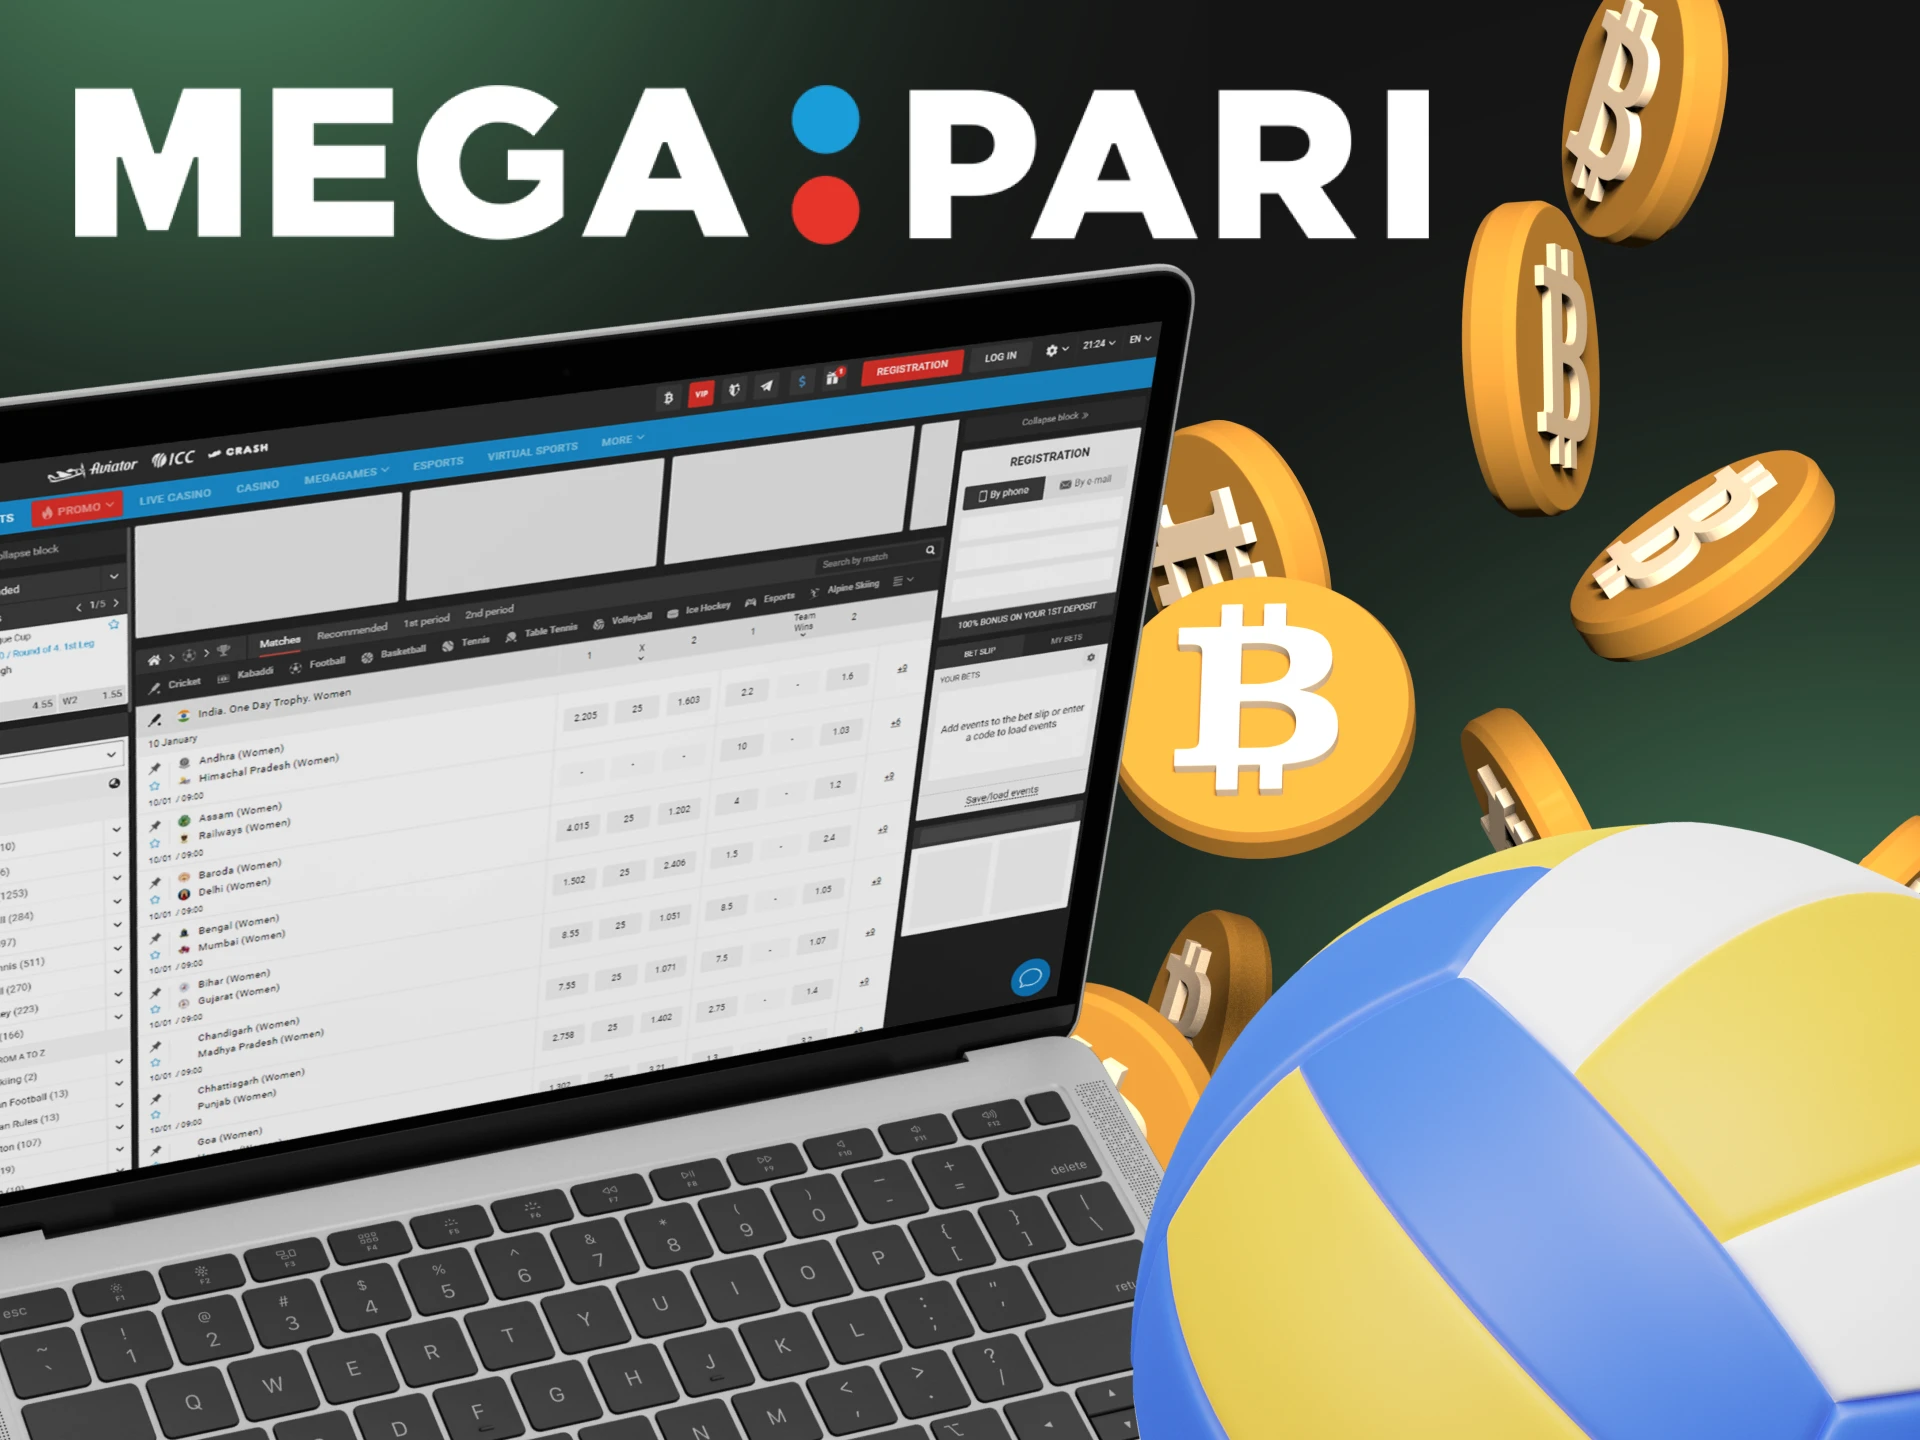 Place bets on sporting events using cryptocurrency at Megapari.